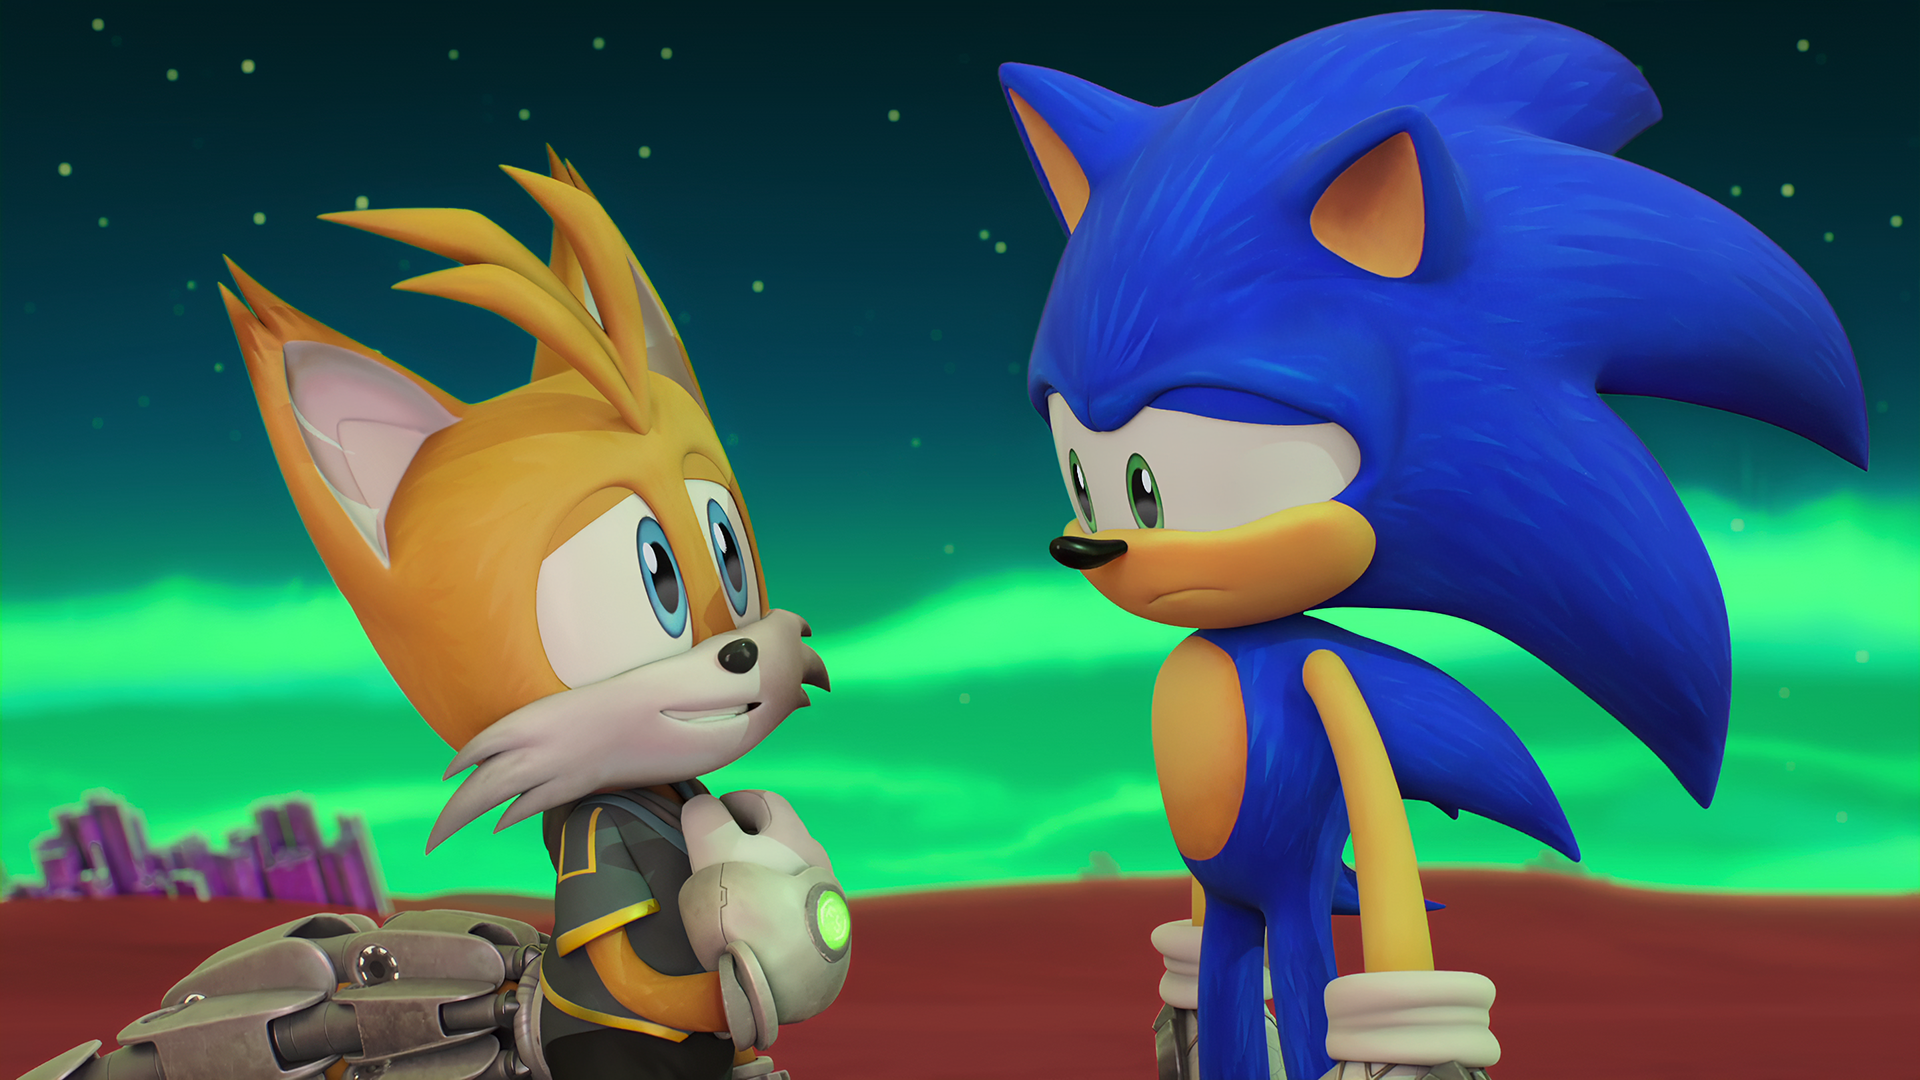 Sonic Prime - Tails Nine #56 by SonicBoomGirl23 on DeviantArt